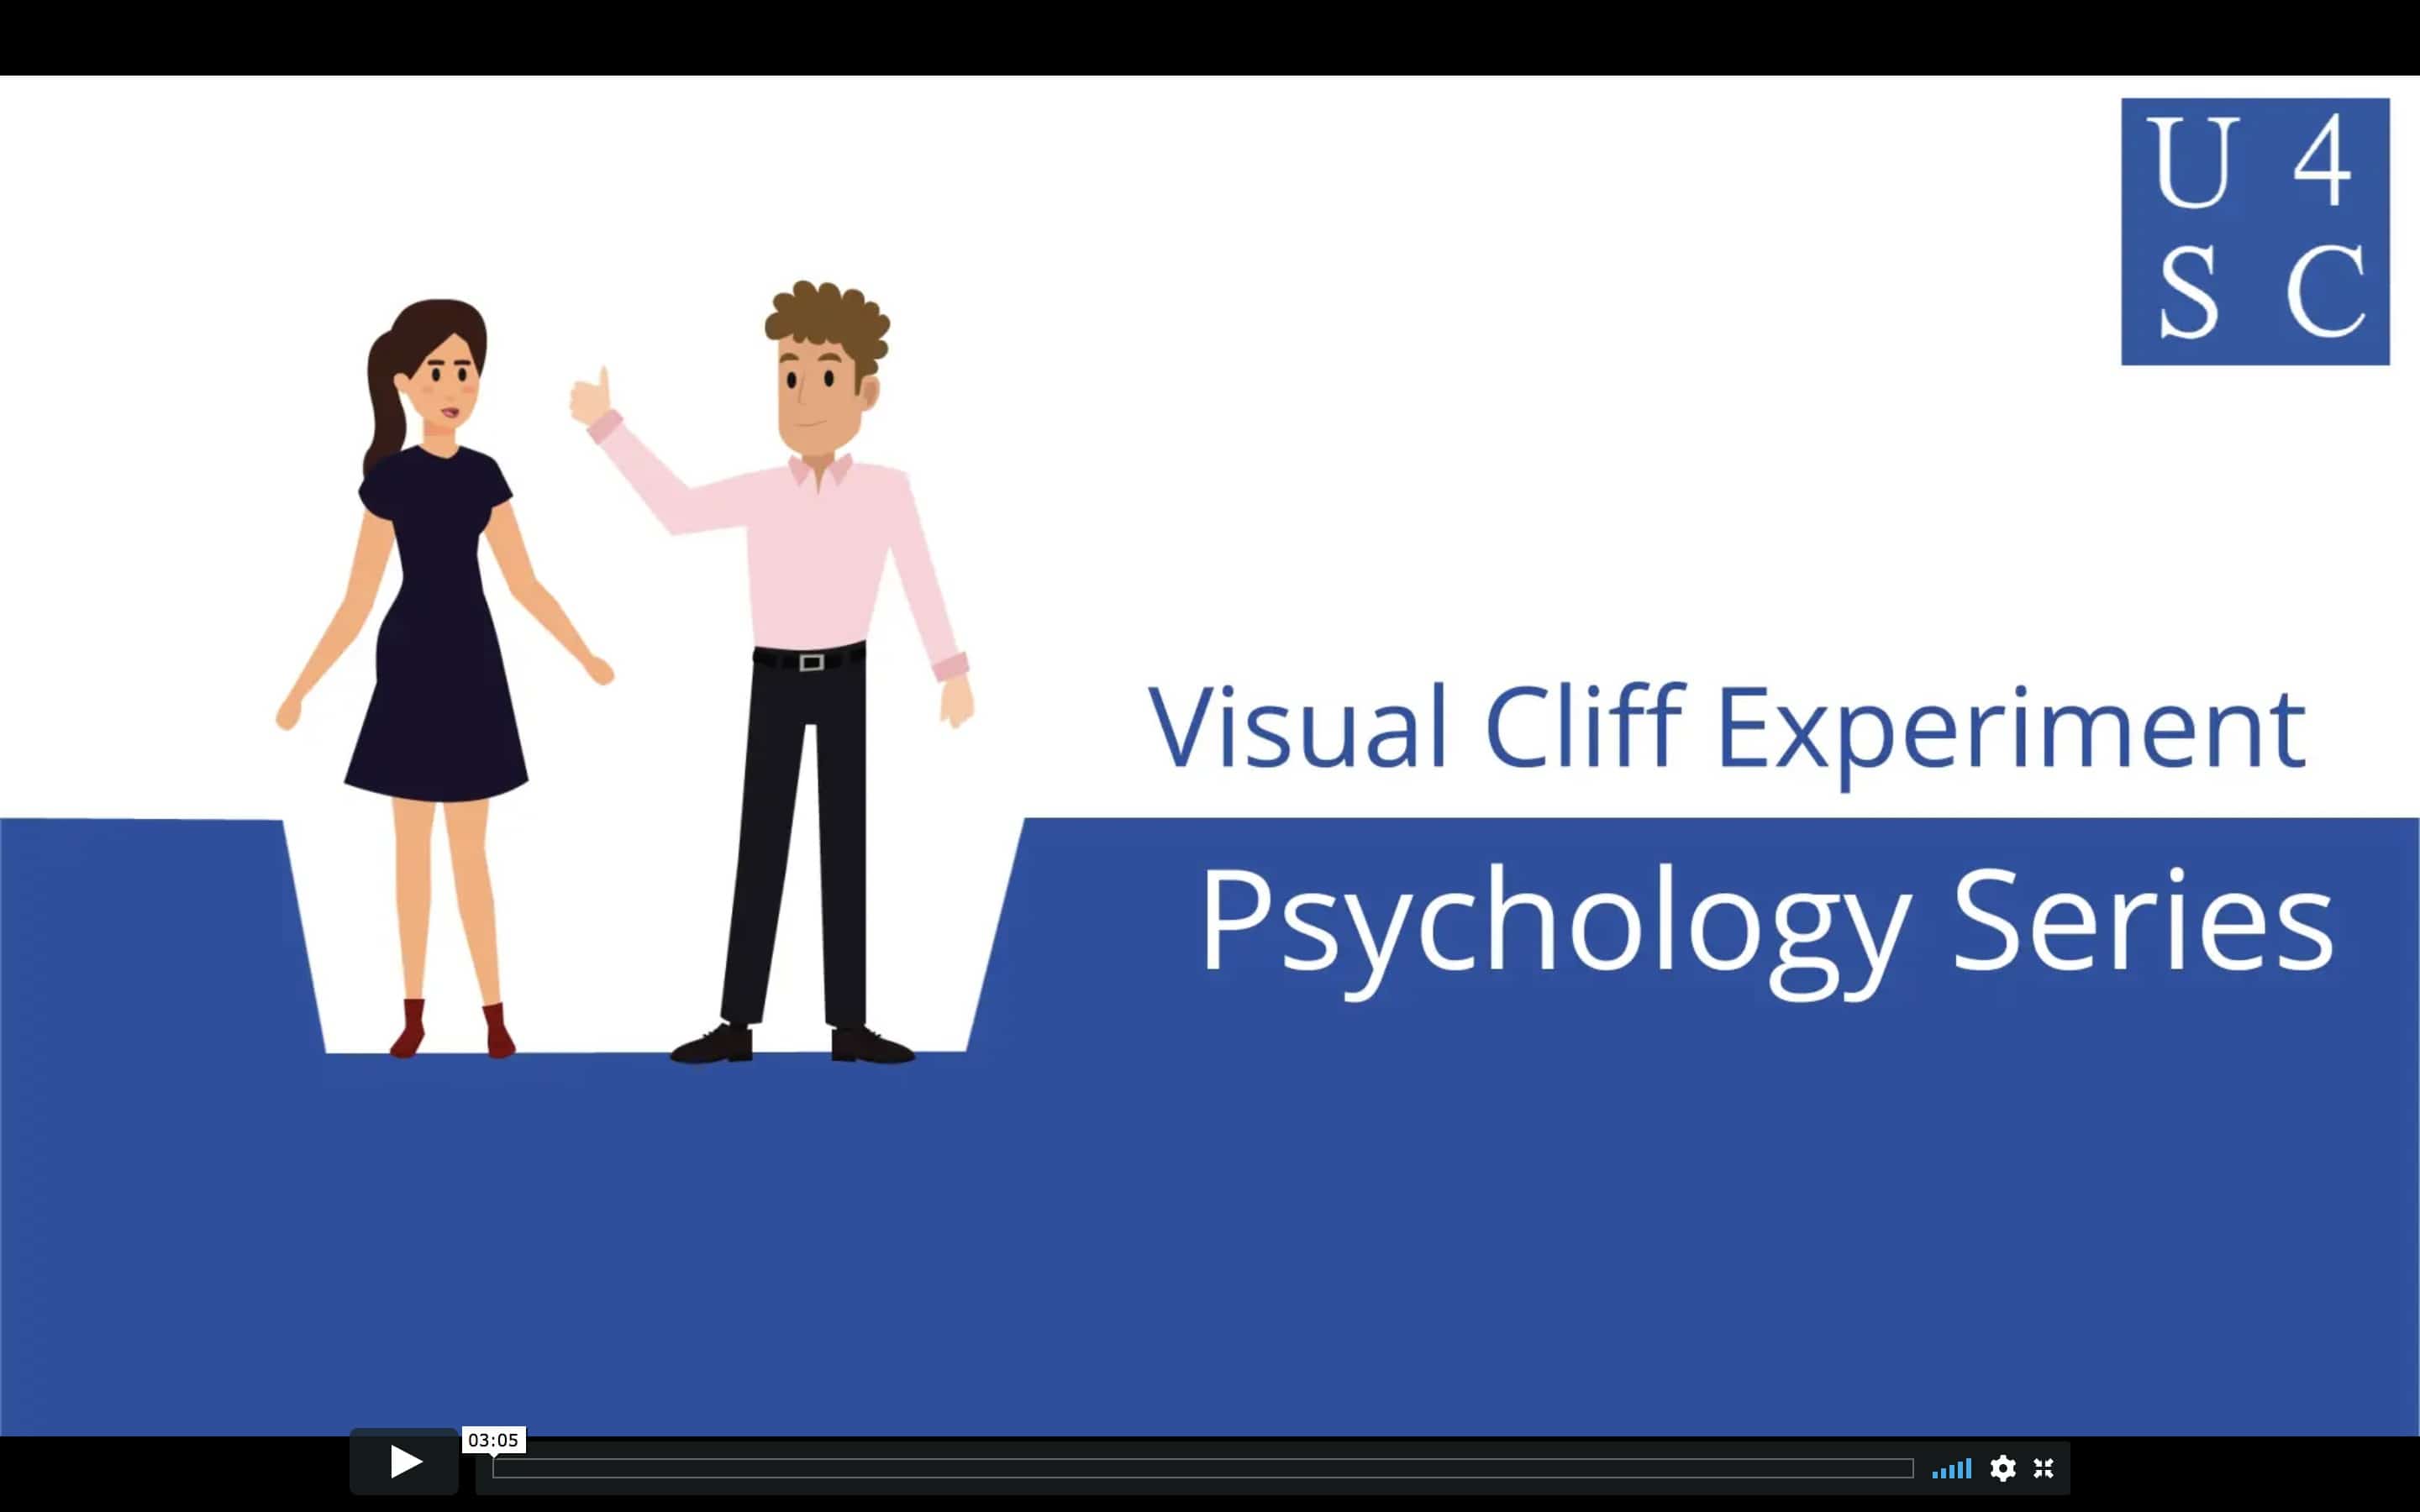 findings from the visual cliff paradigm suggest that